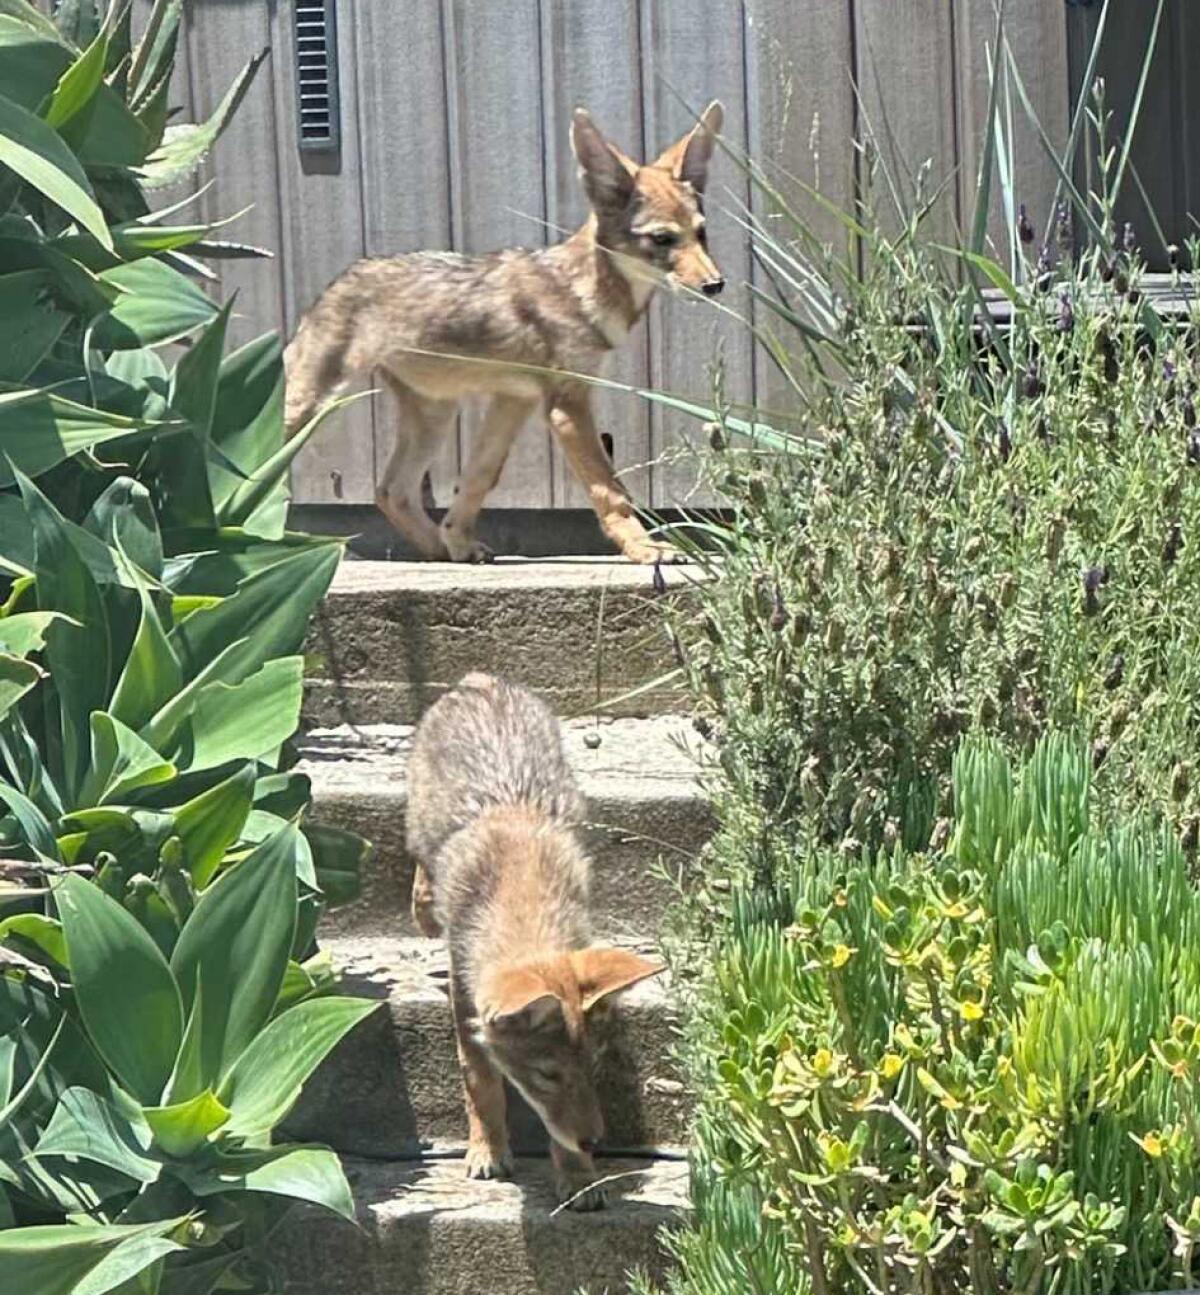 Coyotes at Jennifer Bedolla's home in Mar Vista. One expert says the coyotes' behavior is linked to pupping season.